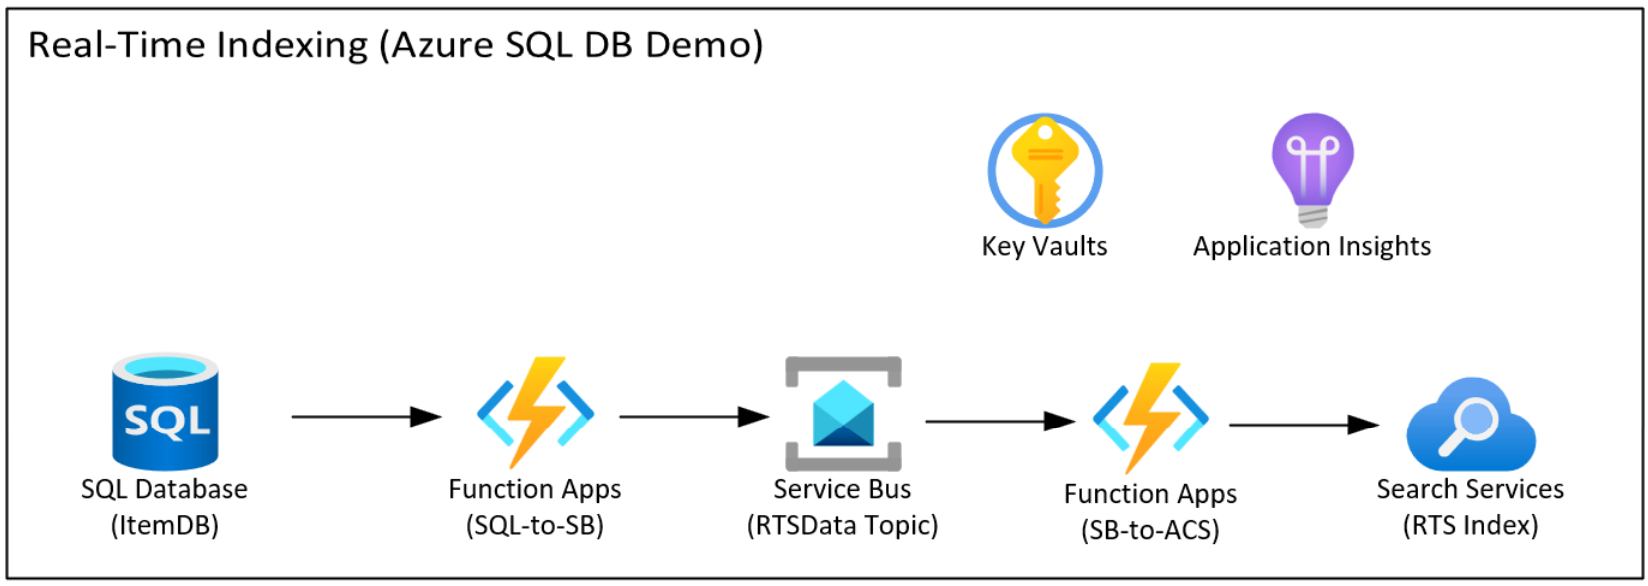 Near real-time indexing for Azure SQL Database